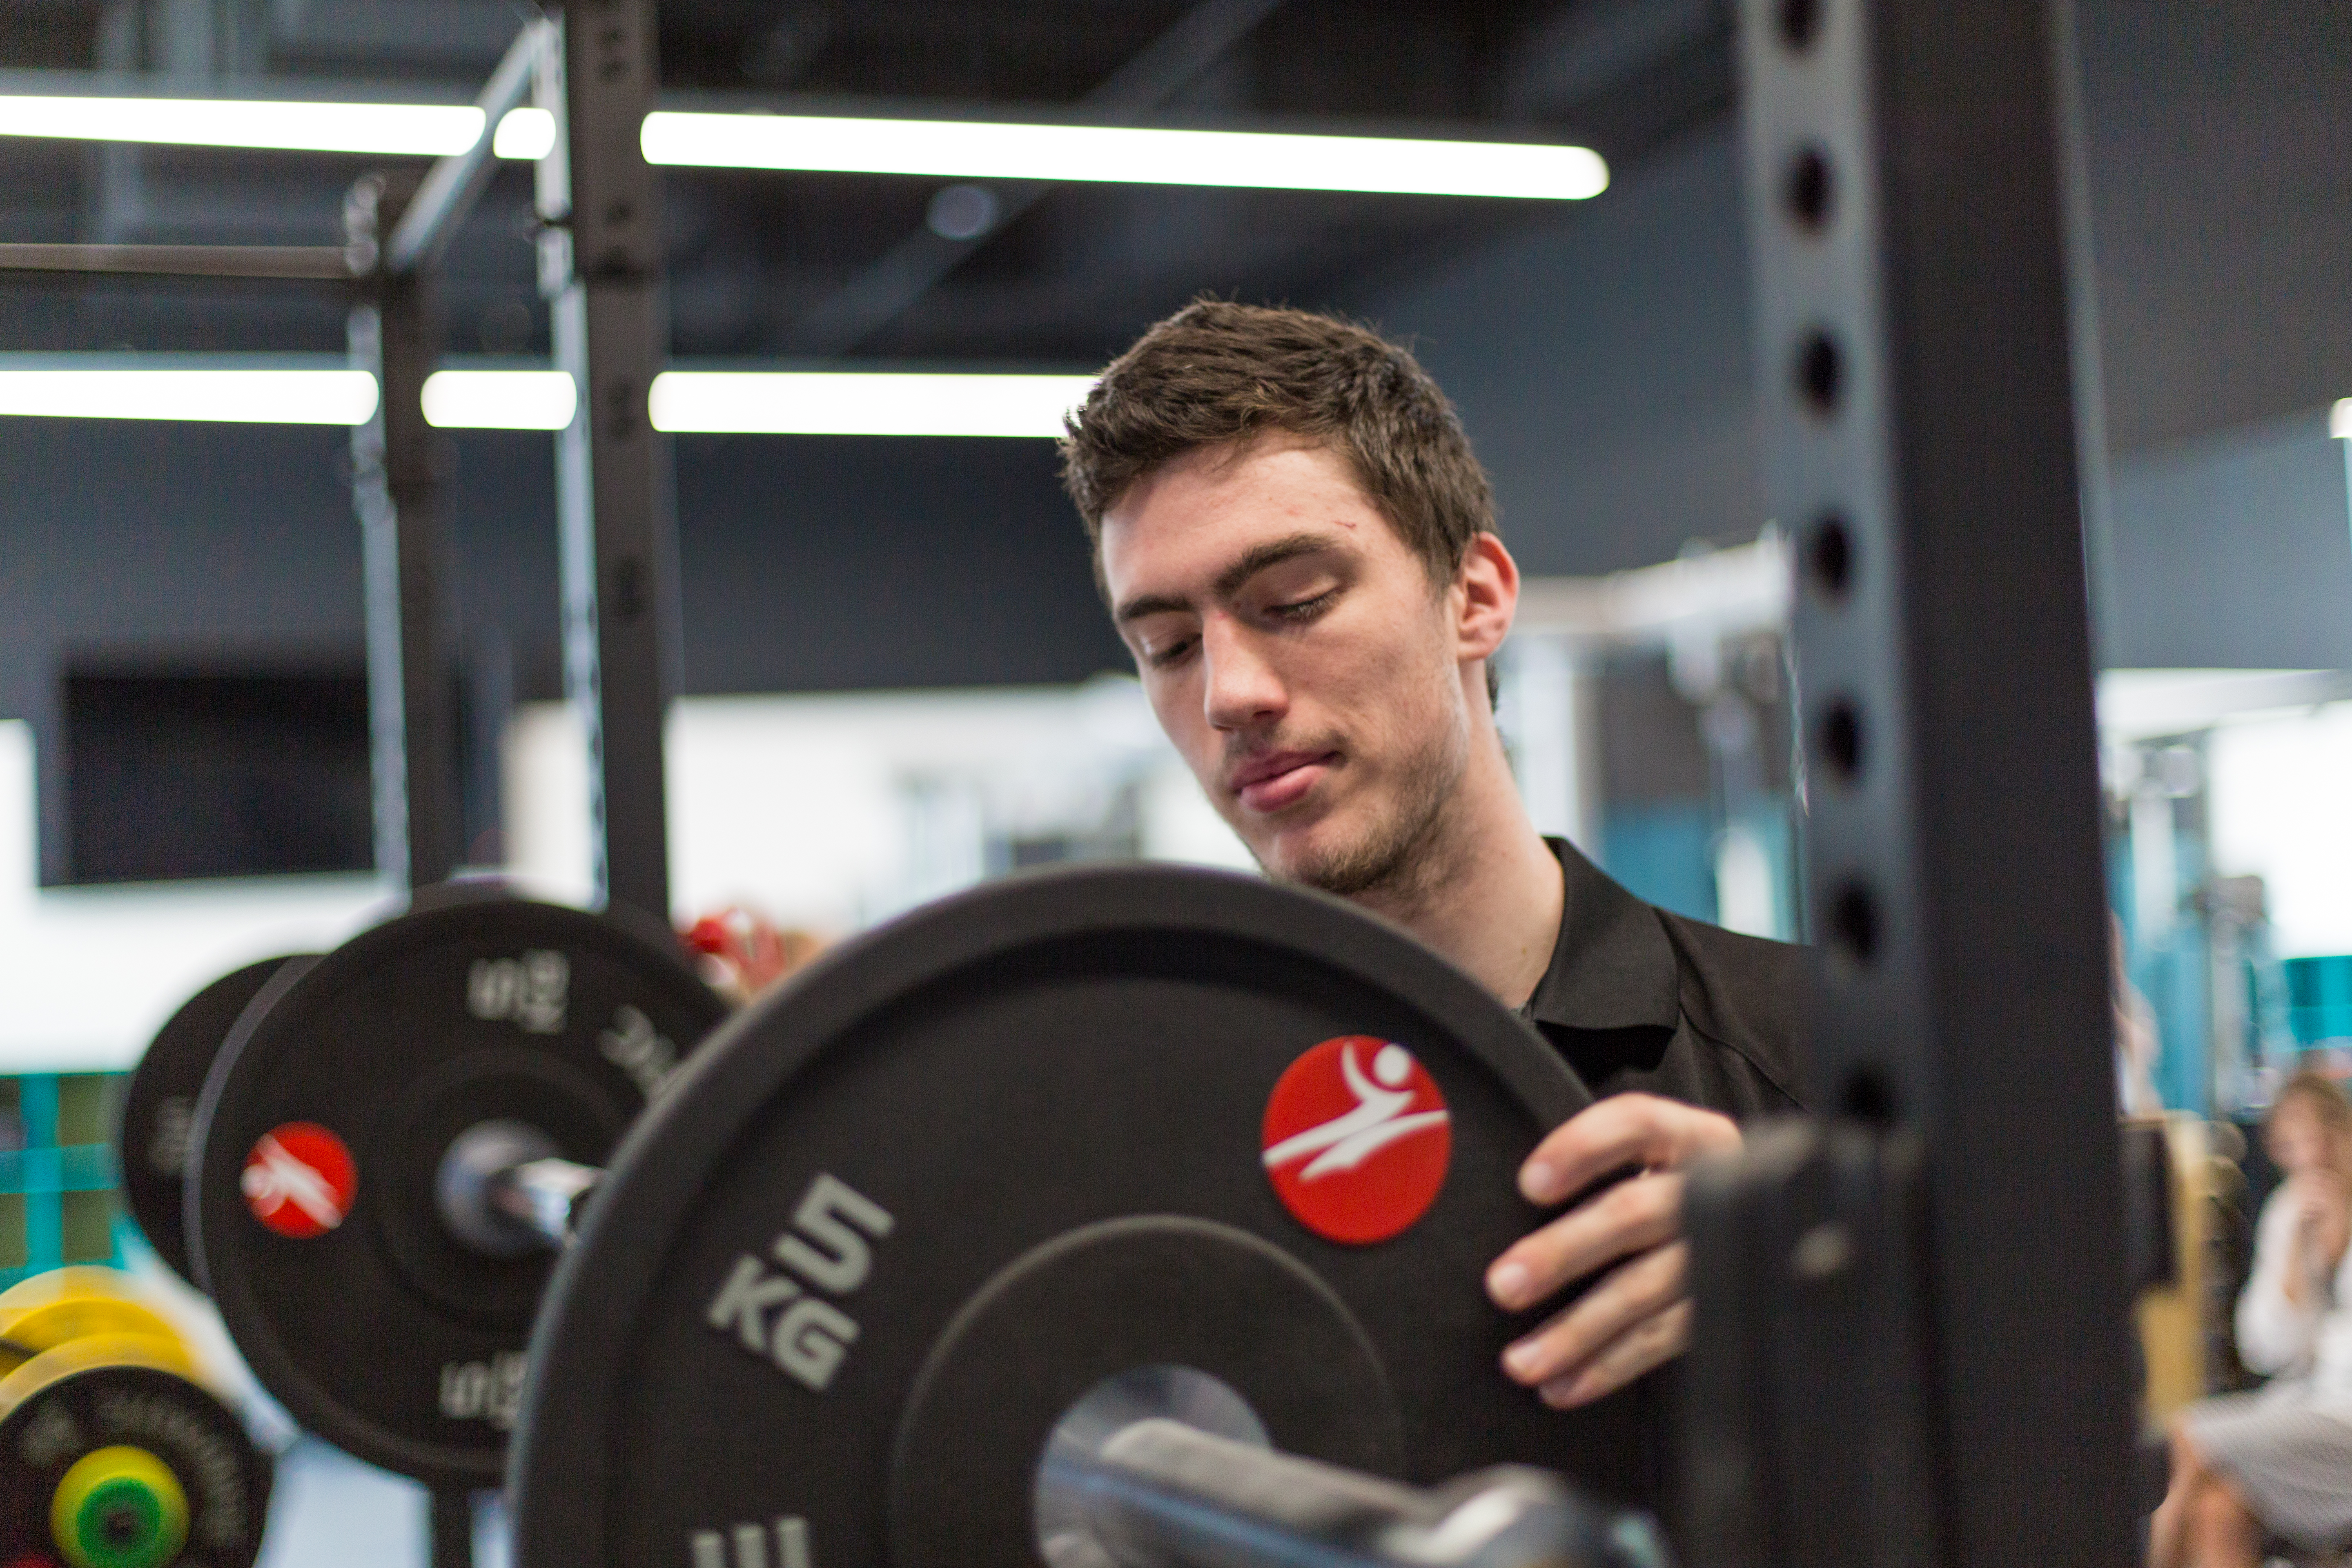 Male student in the gym lifts a weight onto a bar